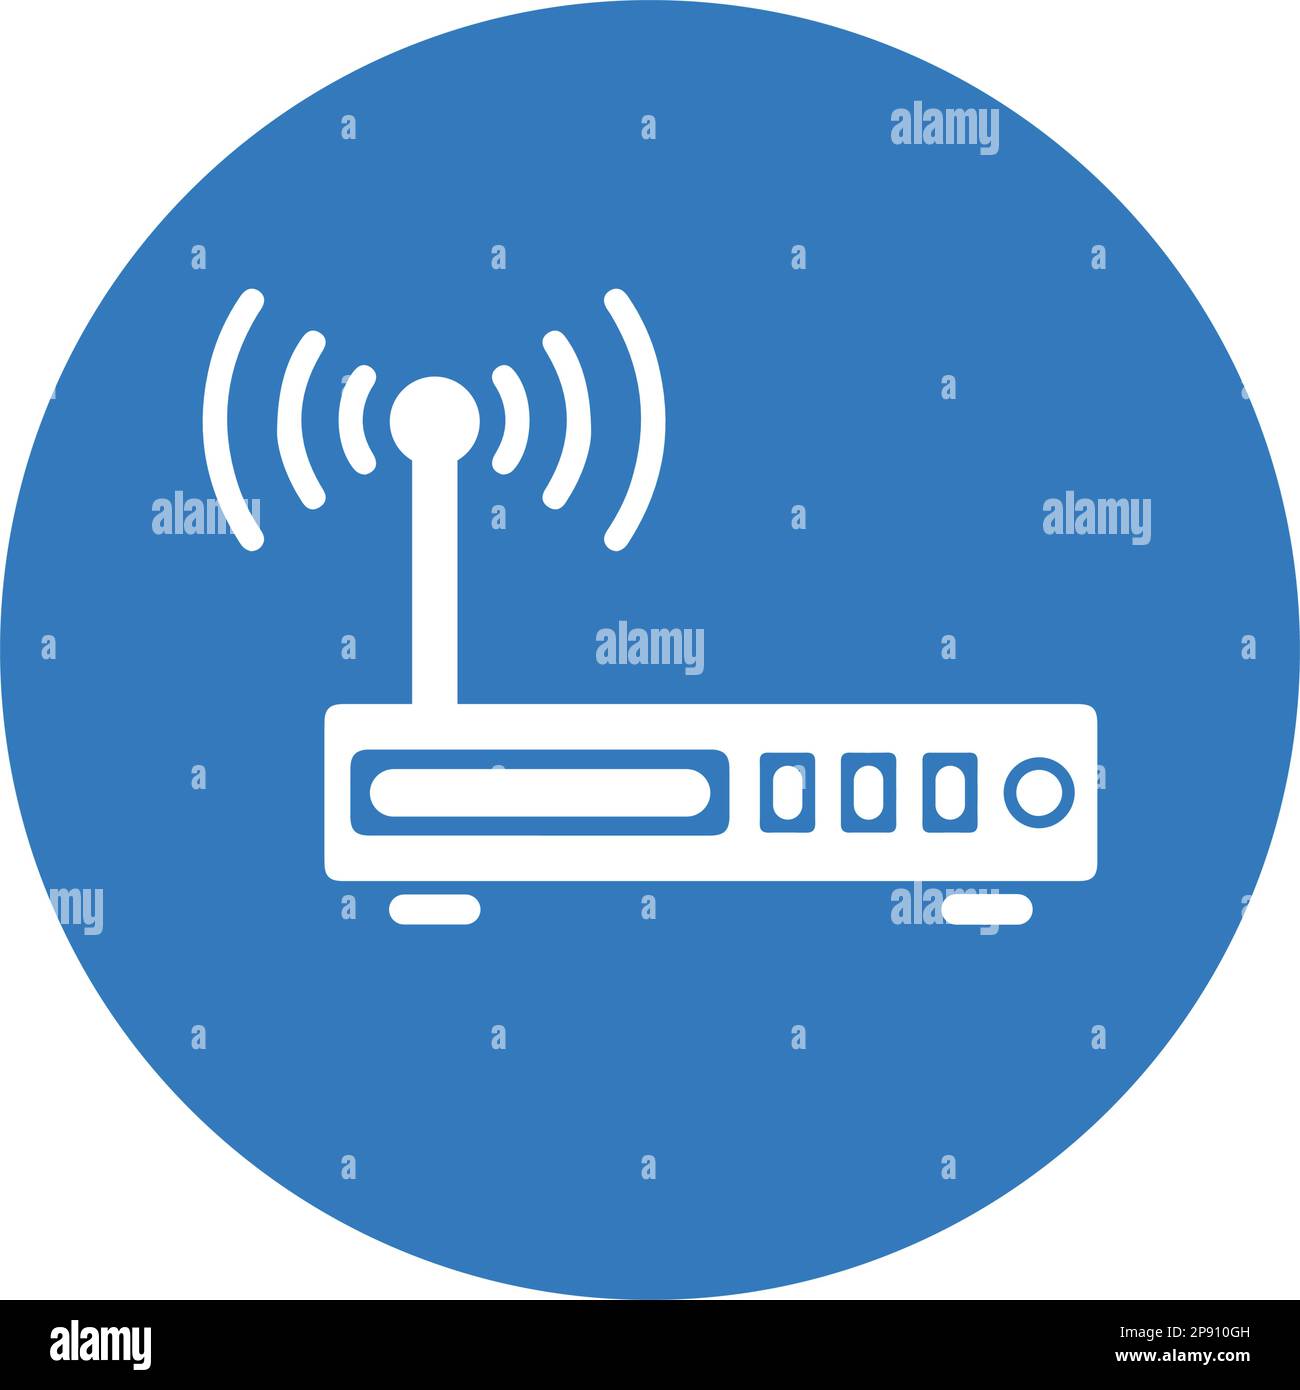 Internet, WiFi router icon, vector graphics for various use. Stock Vector